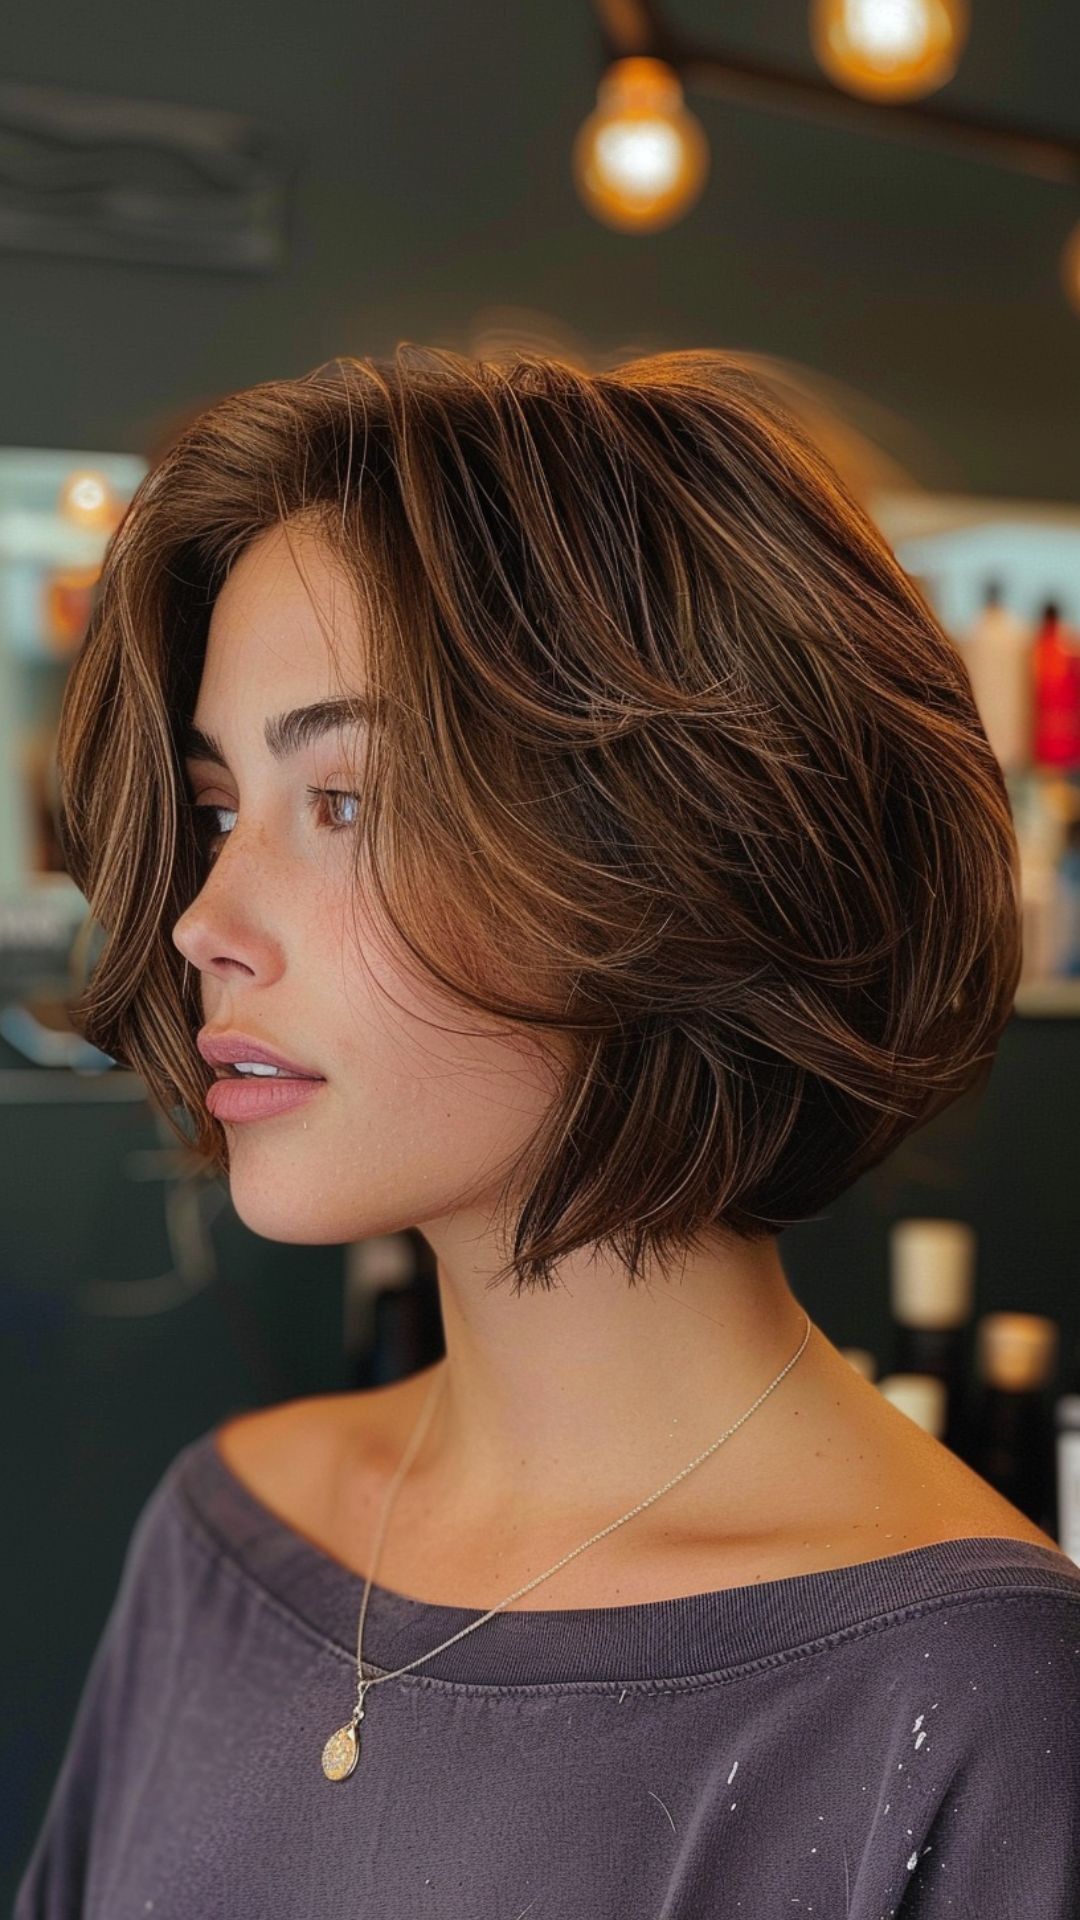 The Ultimate Guide to Flattering Haircuts for Women